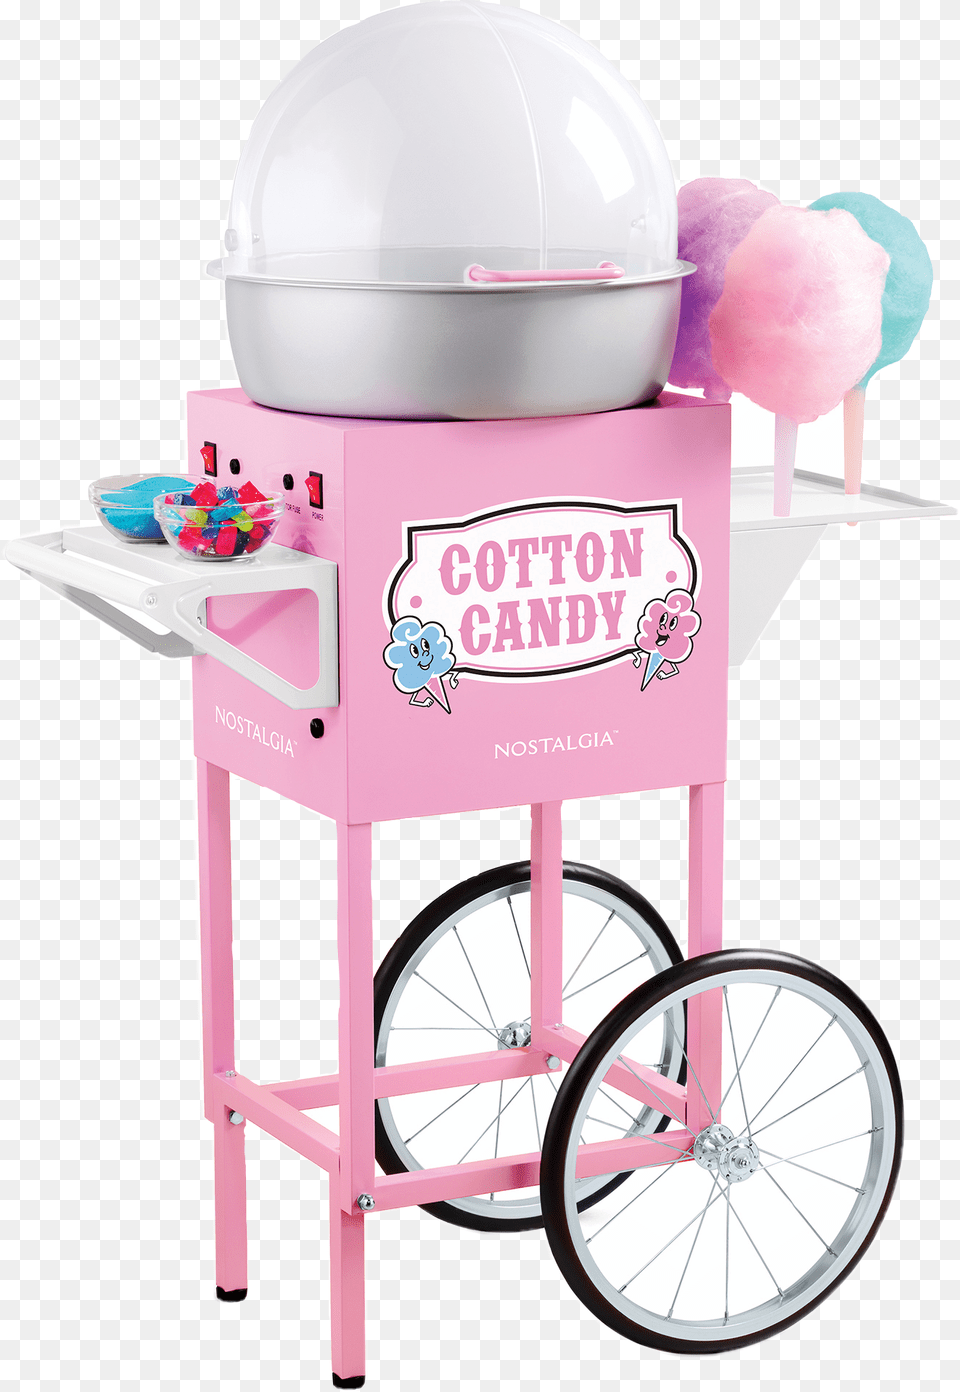 Candy Cottoncandy Fair Carnival Food Nostalgia Cotton Candy Machine, Wheel, Sweets Free Transparent Png